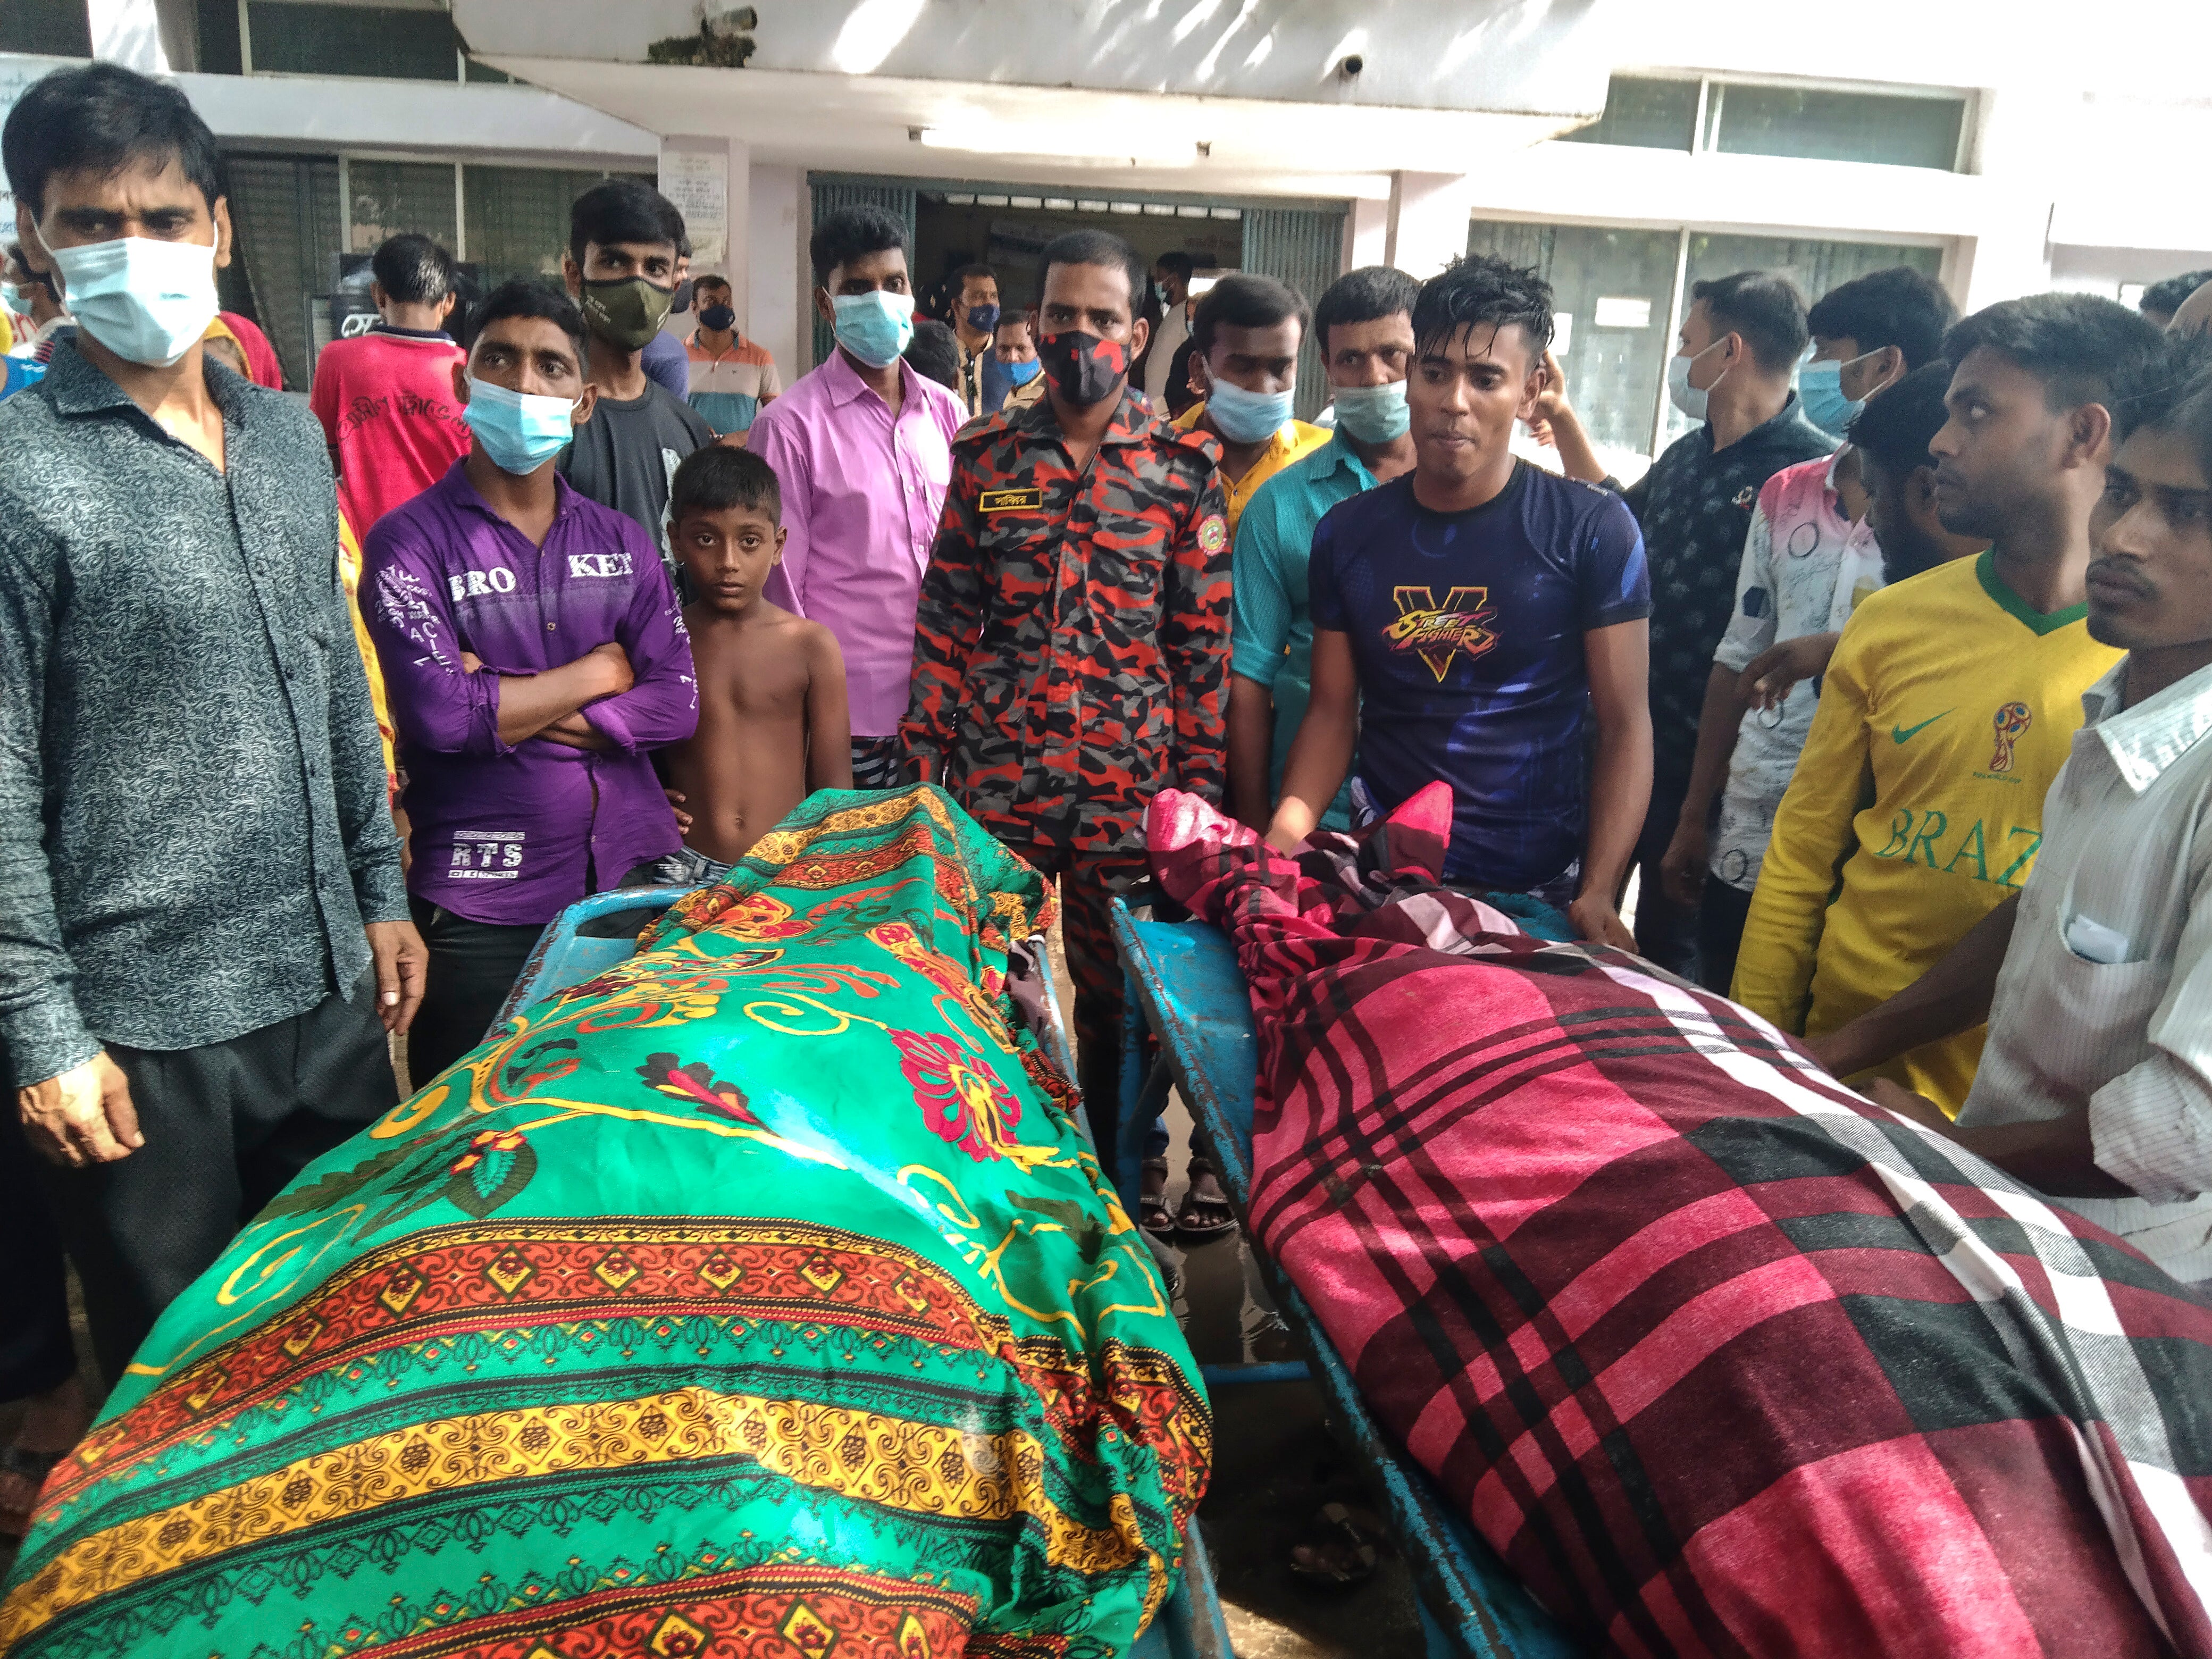 People gather around bodies of victims after lightning killed more than a dozen people in Shibganj town, about 245 kilometres northwest of Dhaka, Bangladesh on 4 August 2021